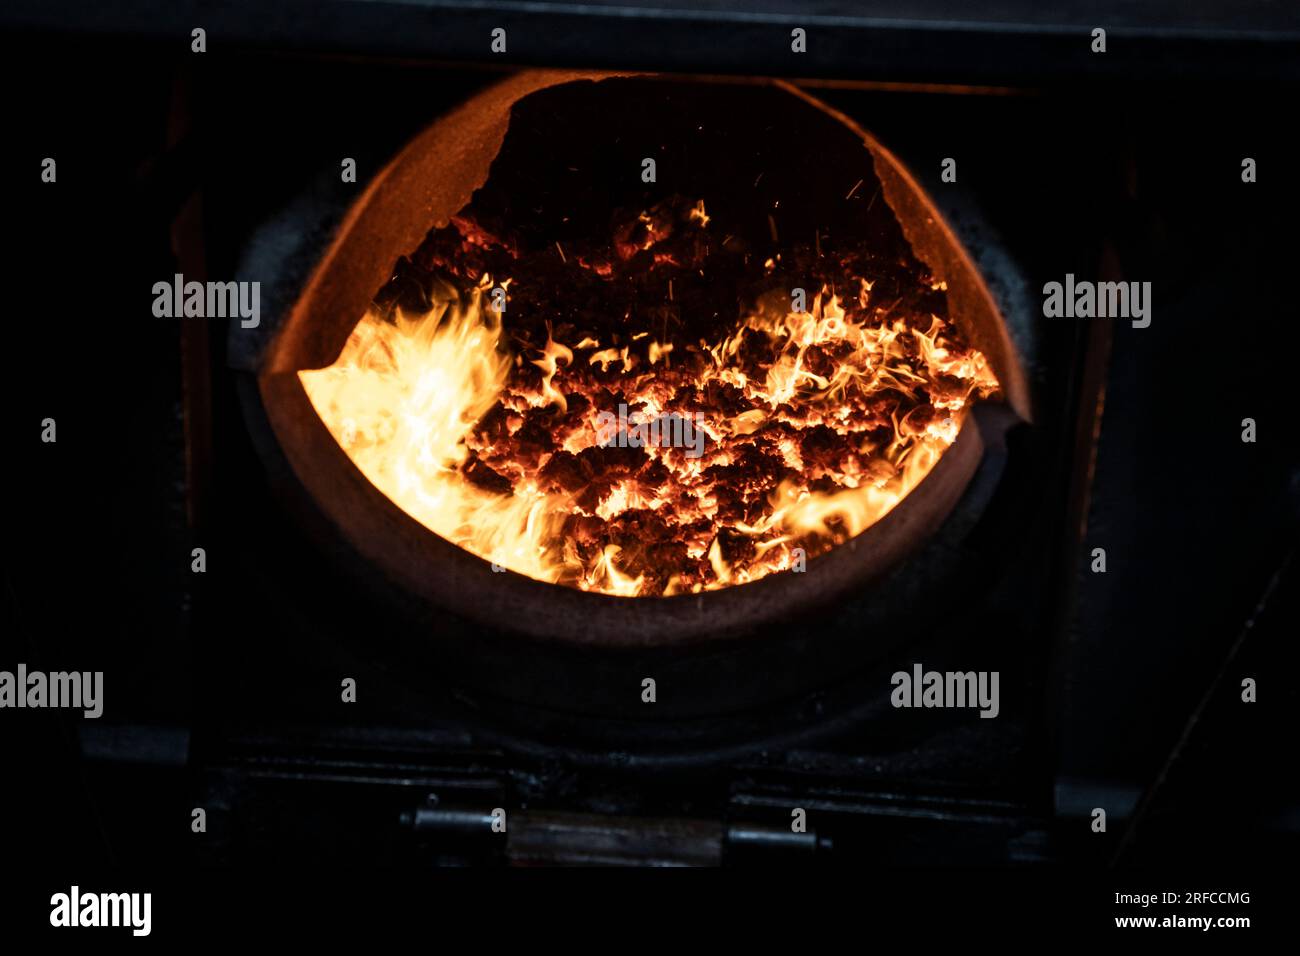 A close up view of a steam train firebox where fuel is burned over grates to produce heat to boil the water in the locomotive boiler Stock Photo